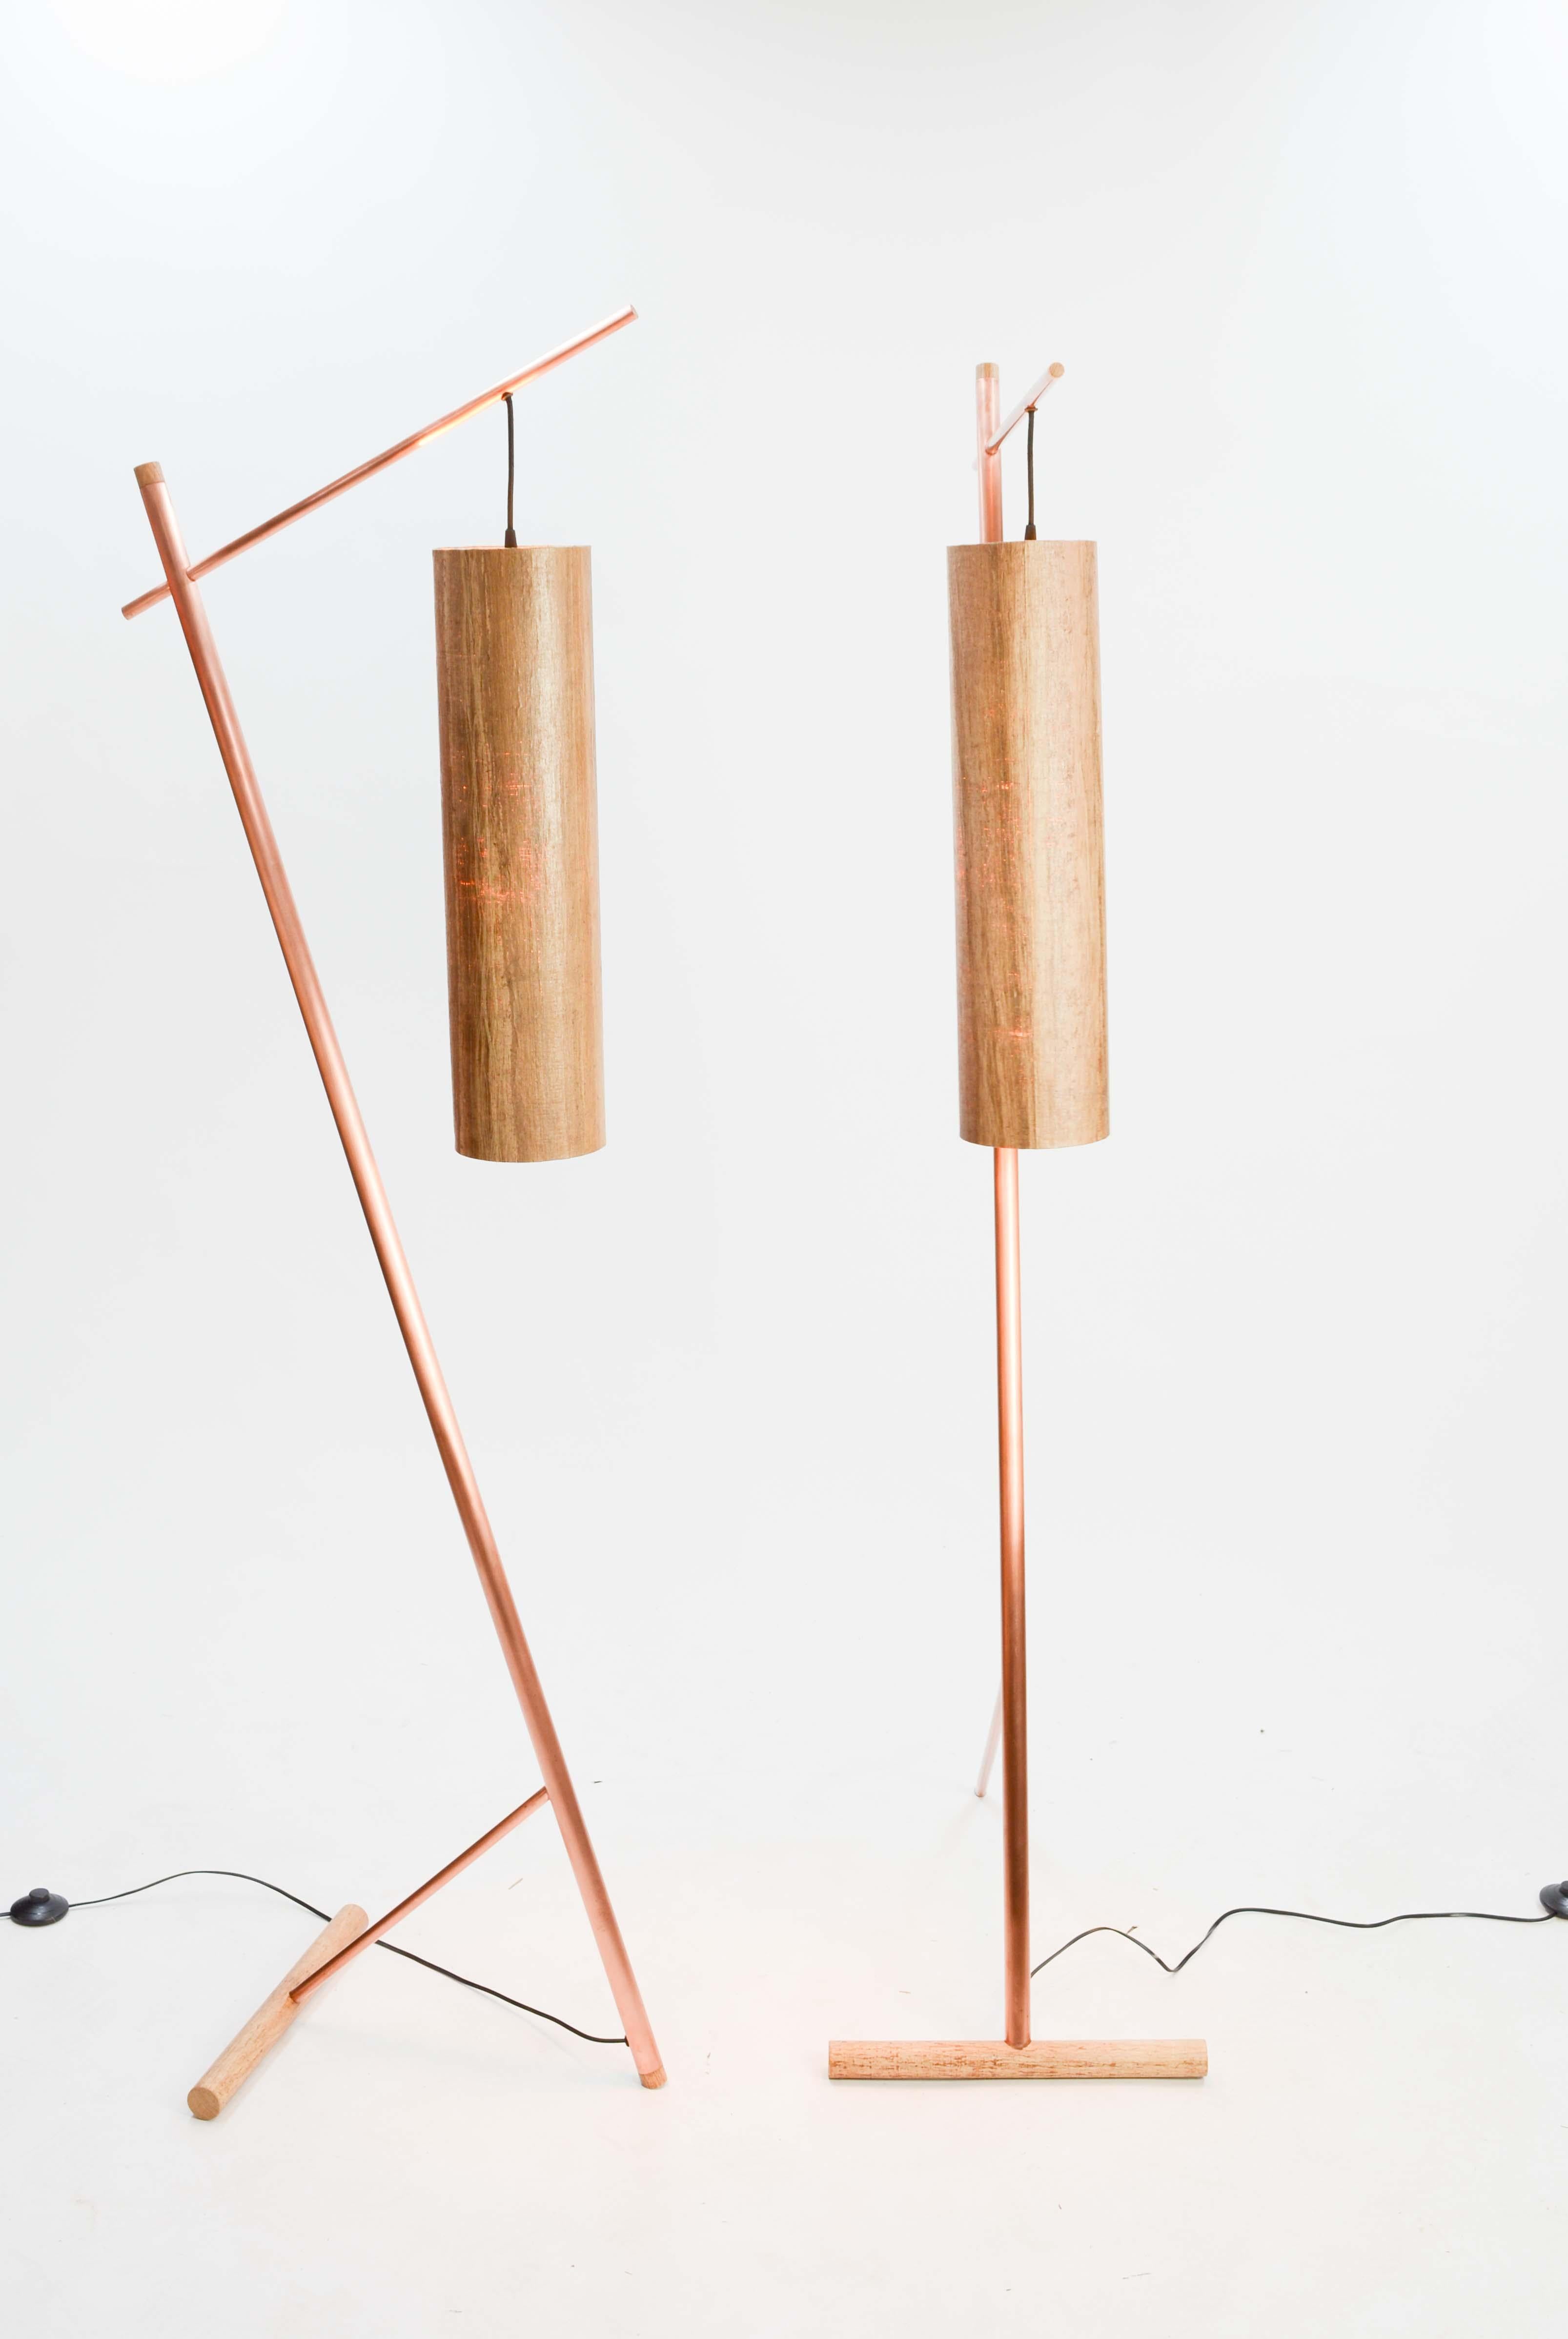 A pair of stylist and elegant floors lamps by seasoned art James Violette. The pair have a uniformed blended Aesthetic of old world craftmanship and new world technology. The simplistic design gives clear nods to Japanese modernism and Italian use